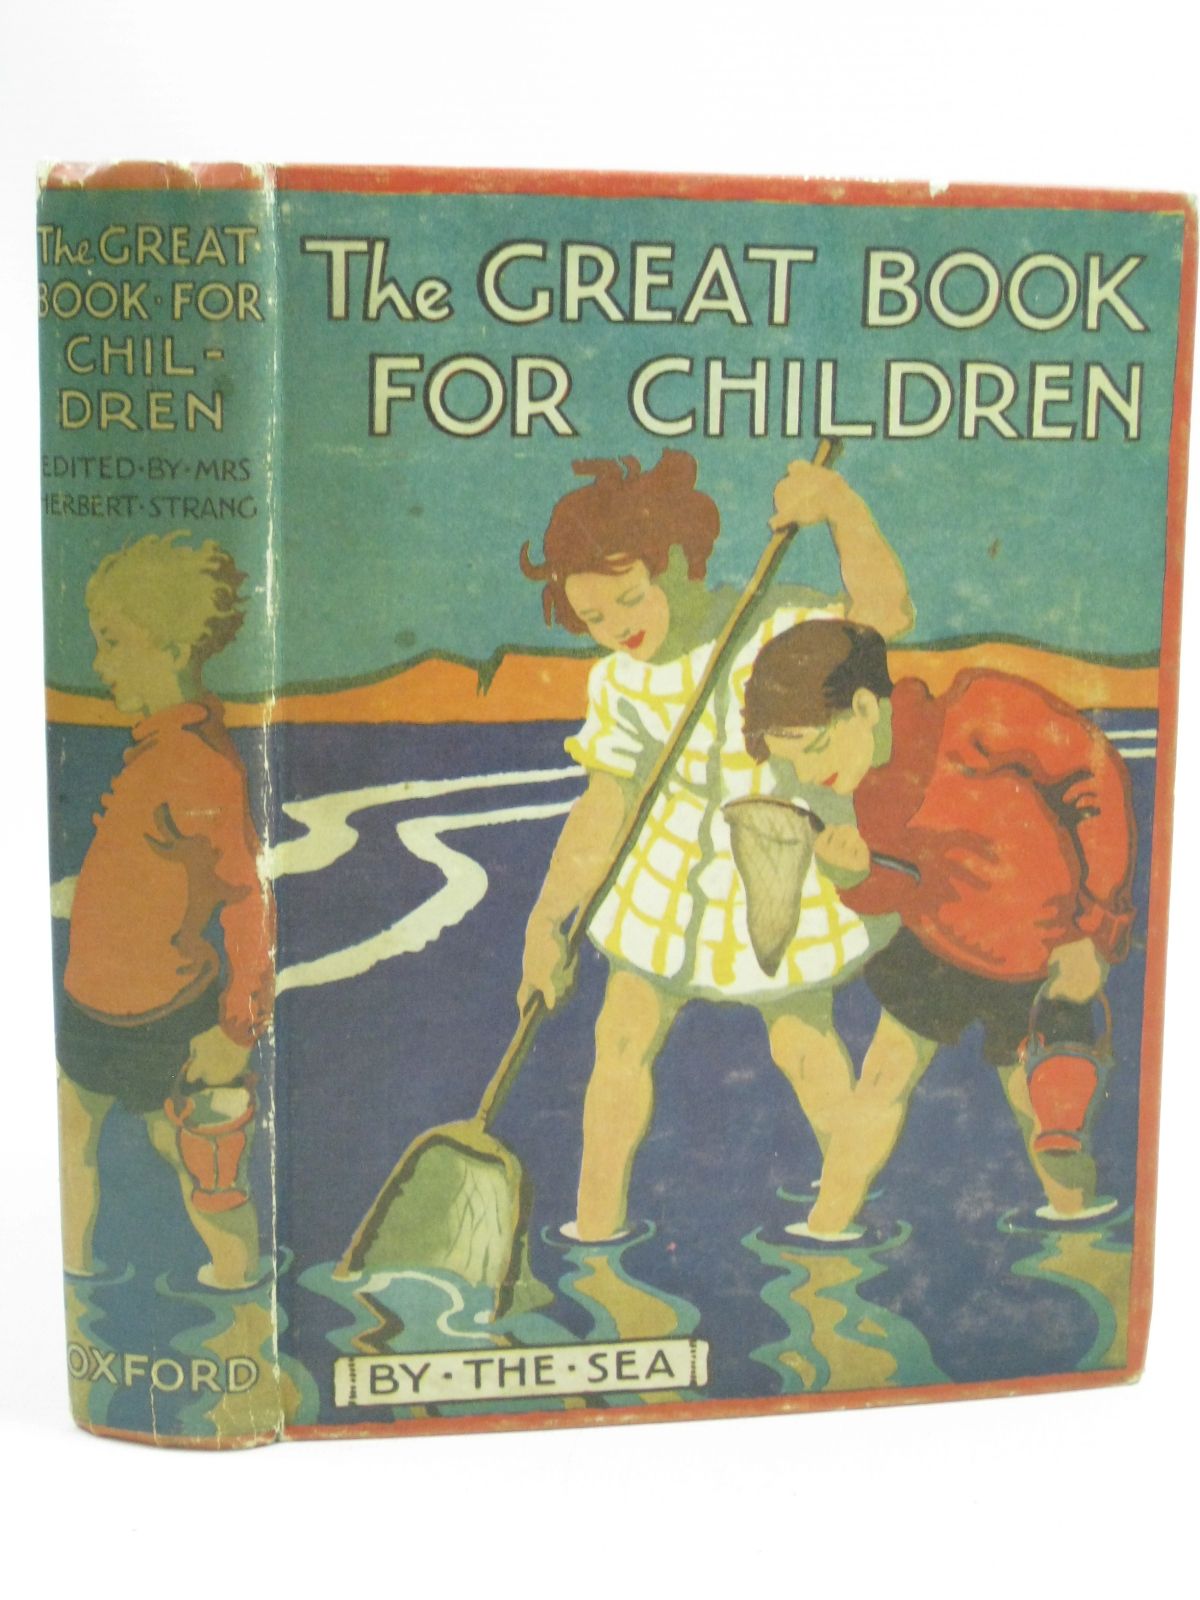 STRANG, MRS. HERBERT & ET AL, ILLUSTRATED BY REEVE, MARY S. & ARIS, ERNEST A. & ANDERSON, ANNE & SMITH, MAY & ET AL., - The Great Book for Children